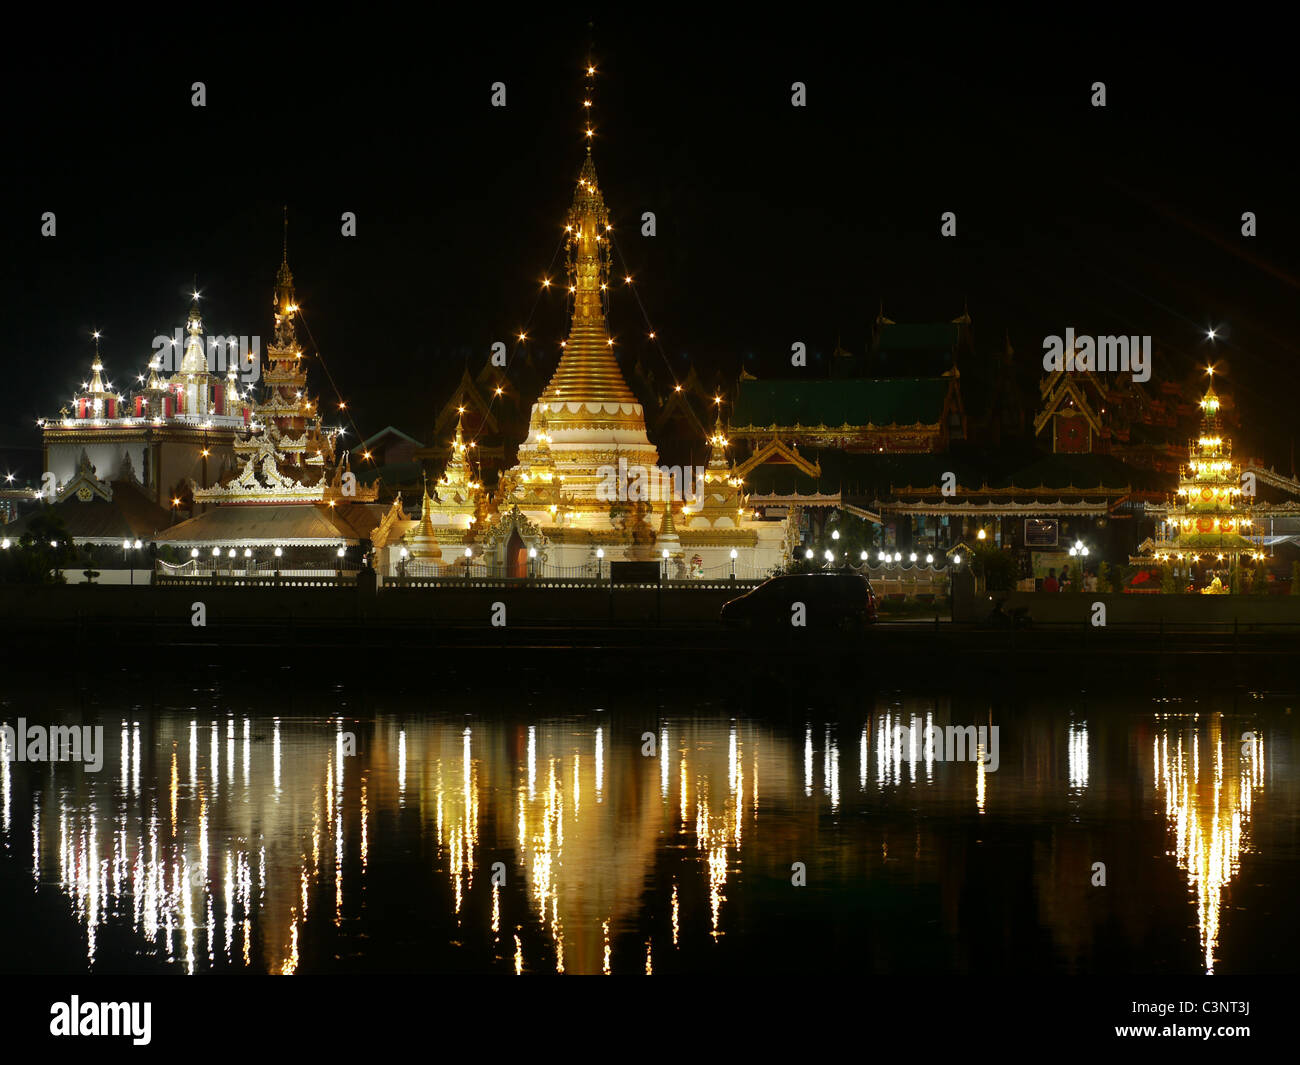 The Shan/Burmese style Wat Jong Klang temple reflected in the Nong Jong Kham pond in Mae Hong Son City, Northern Thailand. Stock Photo